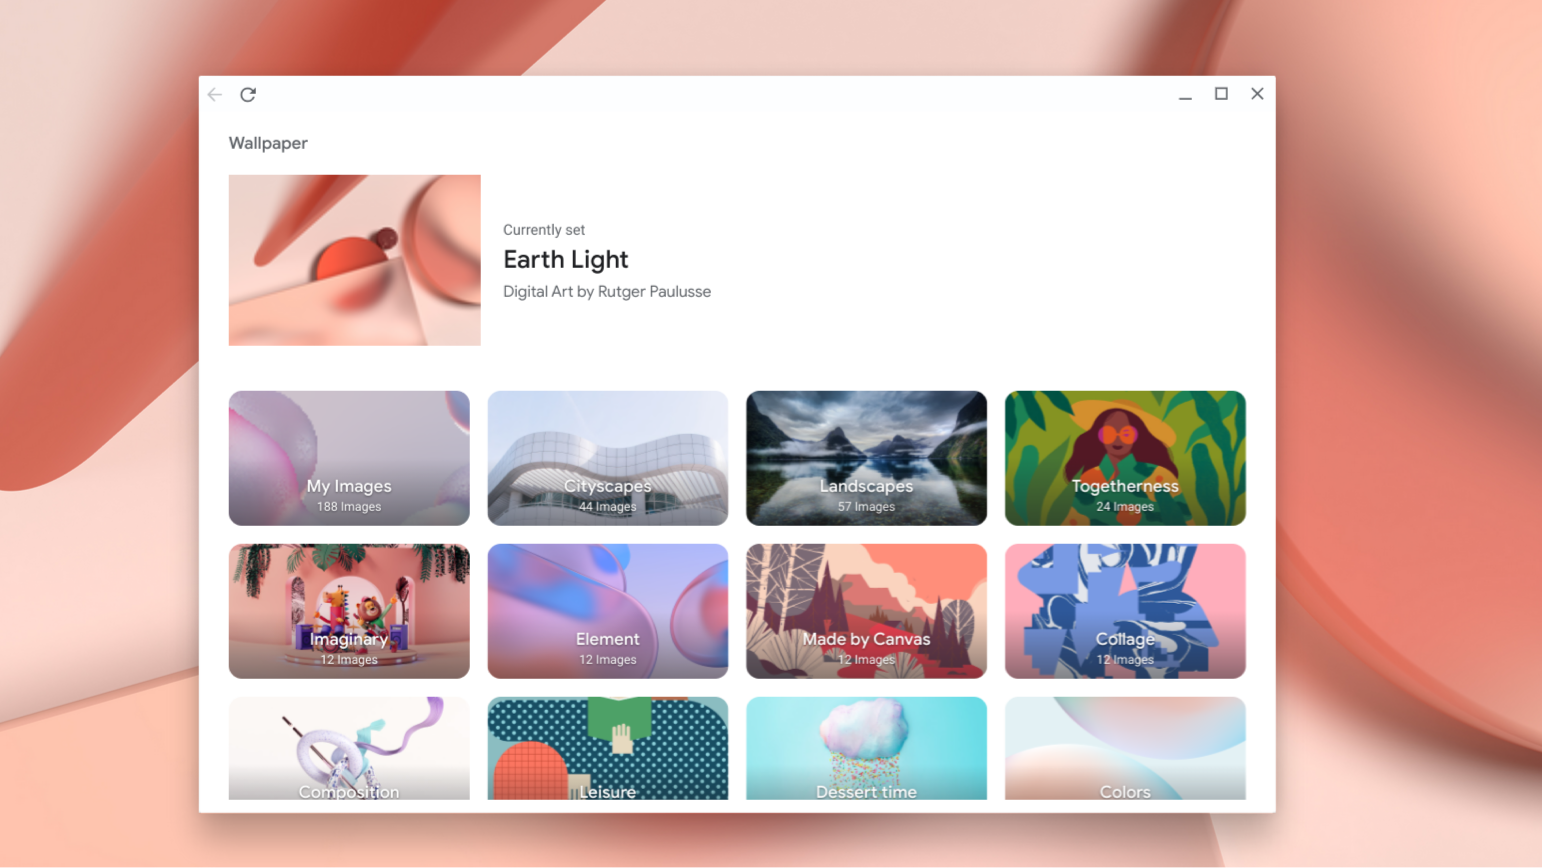 Chrome OS is getting a new wallpaper app with Material You vibes